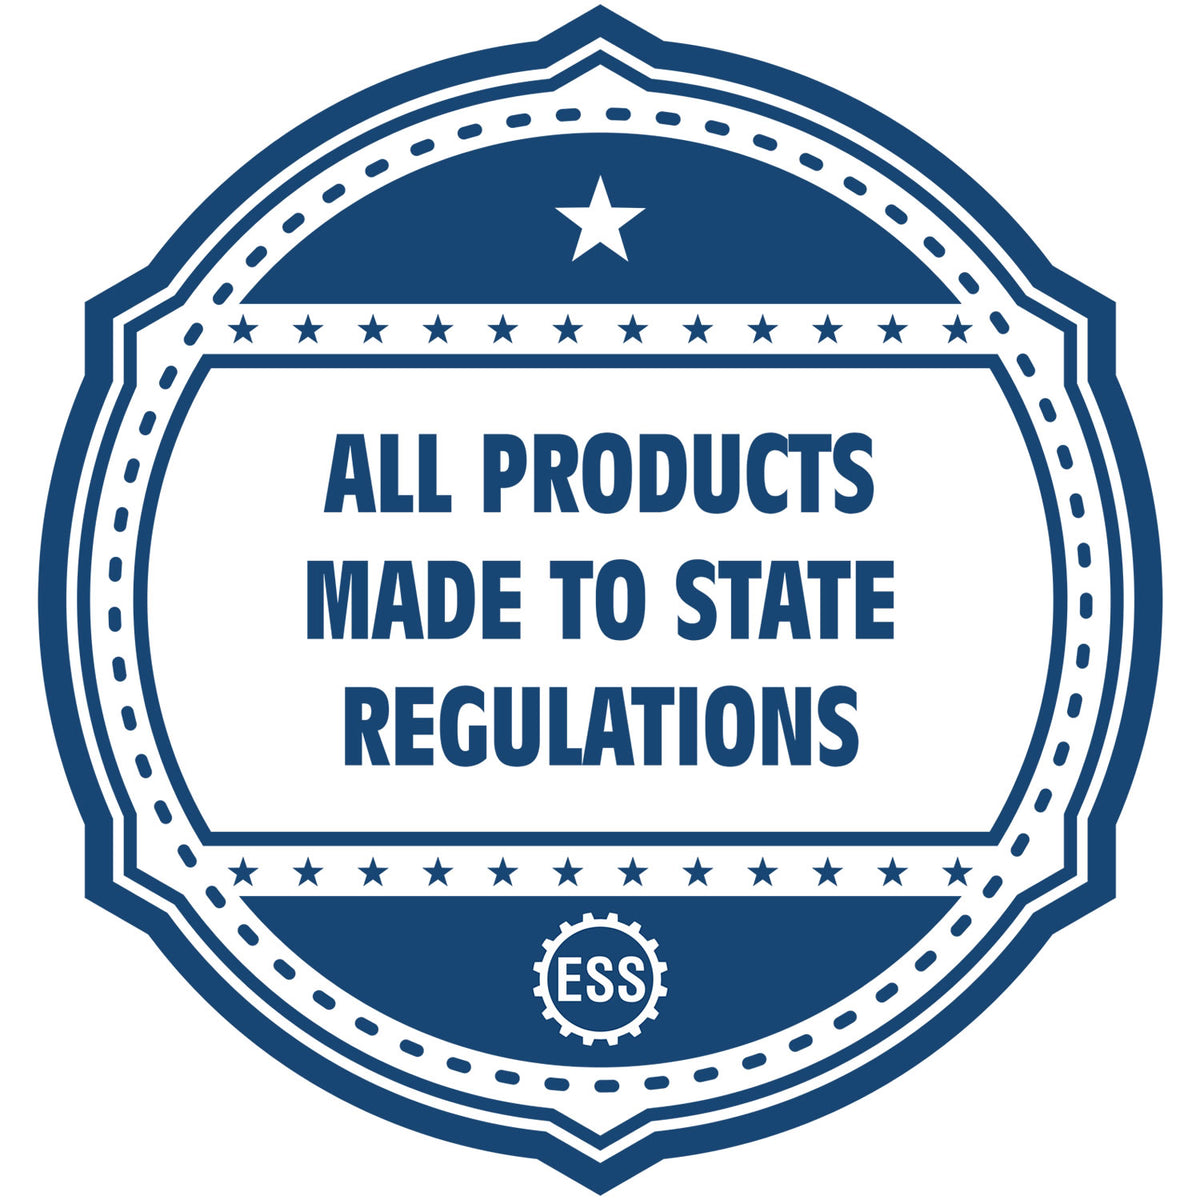 An icon or badge element for the Self-Inking Washington Landscape Architect Stamp showing that this product is made in compliance with state regulations.